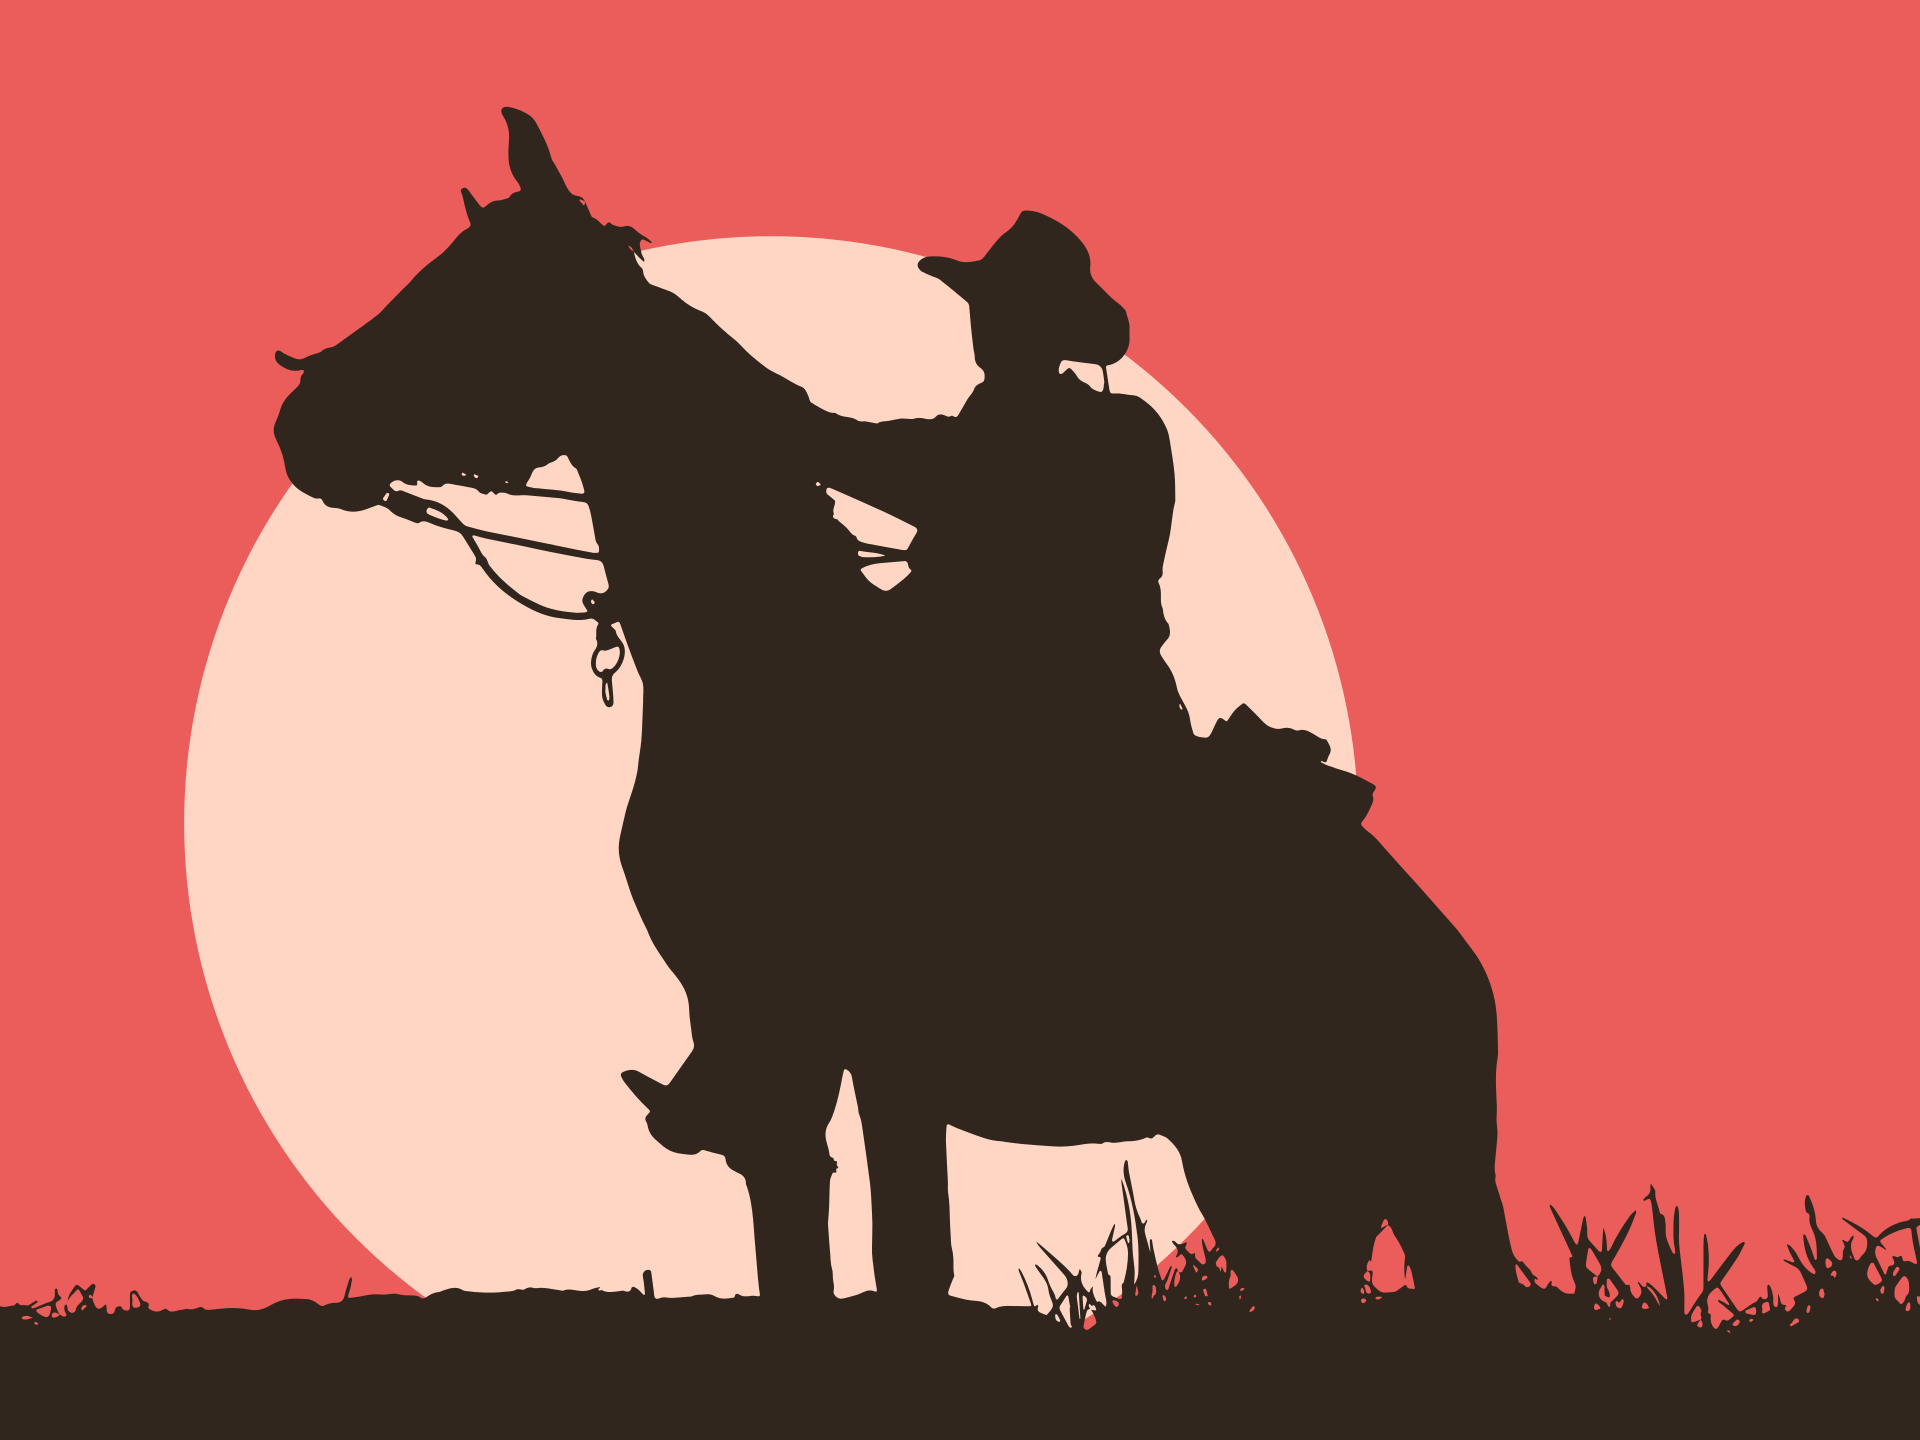 Cowboy riding a horse in the sunset